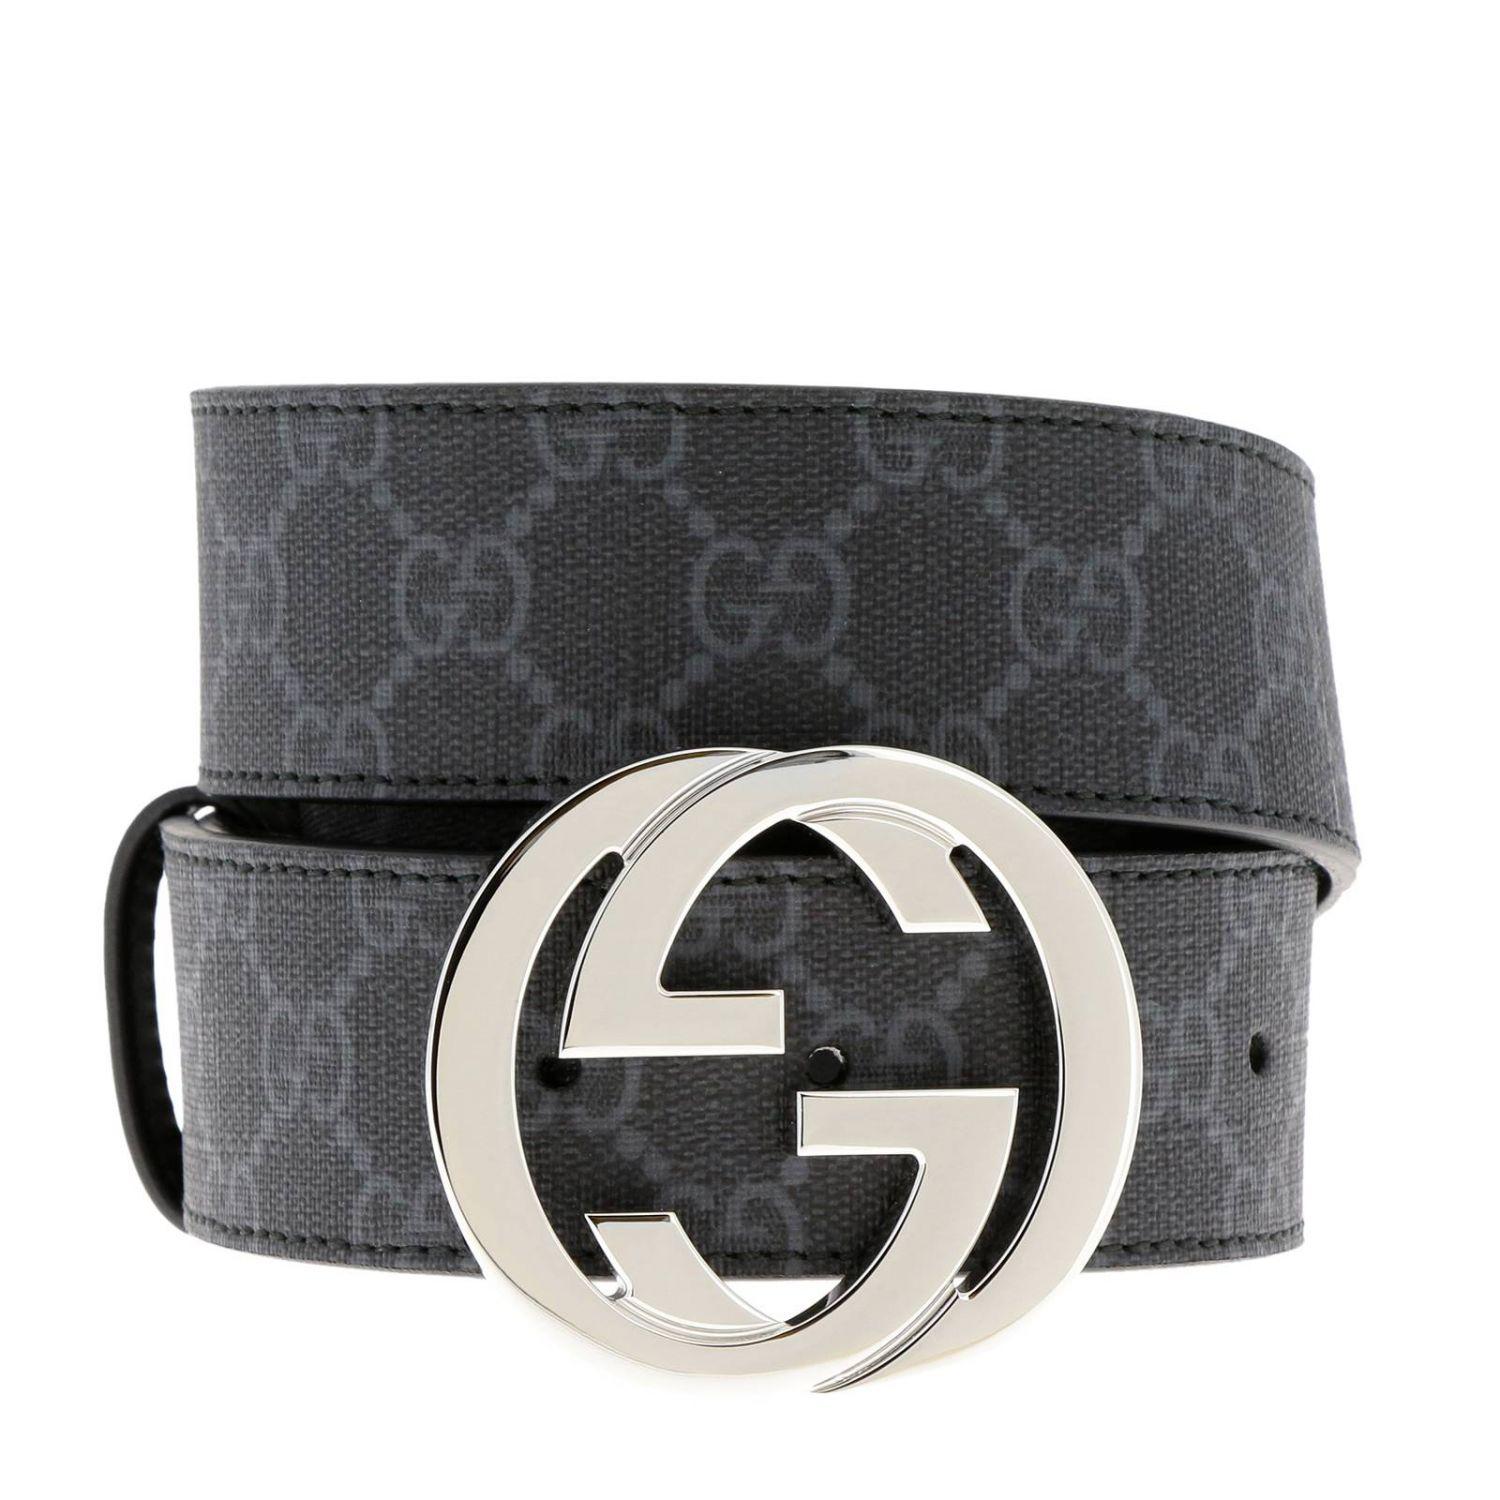 Gucci Canvas GG Supreme Belt With G Buckle in Black for Men - Lyst